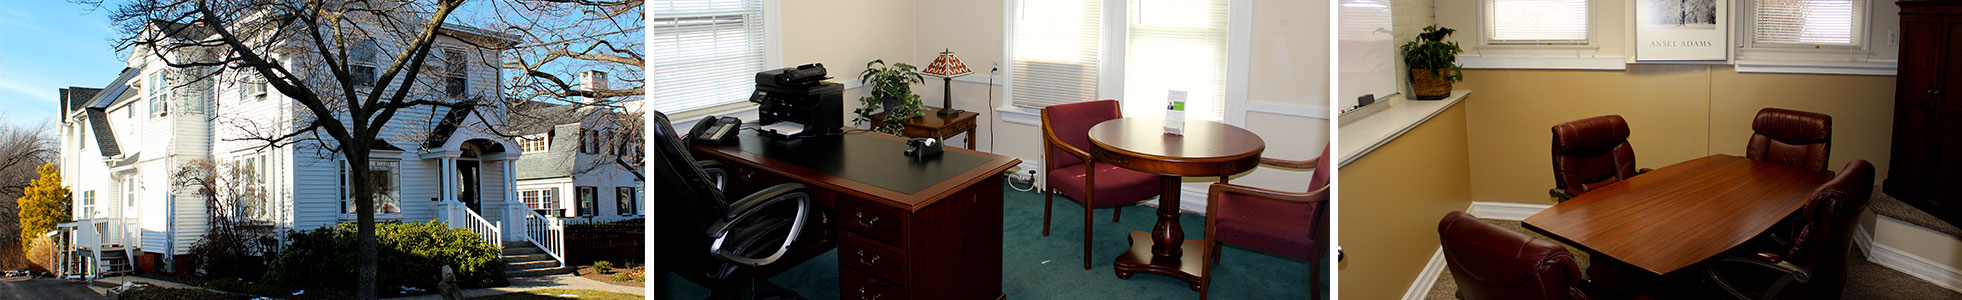 Furnished Office Space for Rent Hartford CT